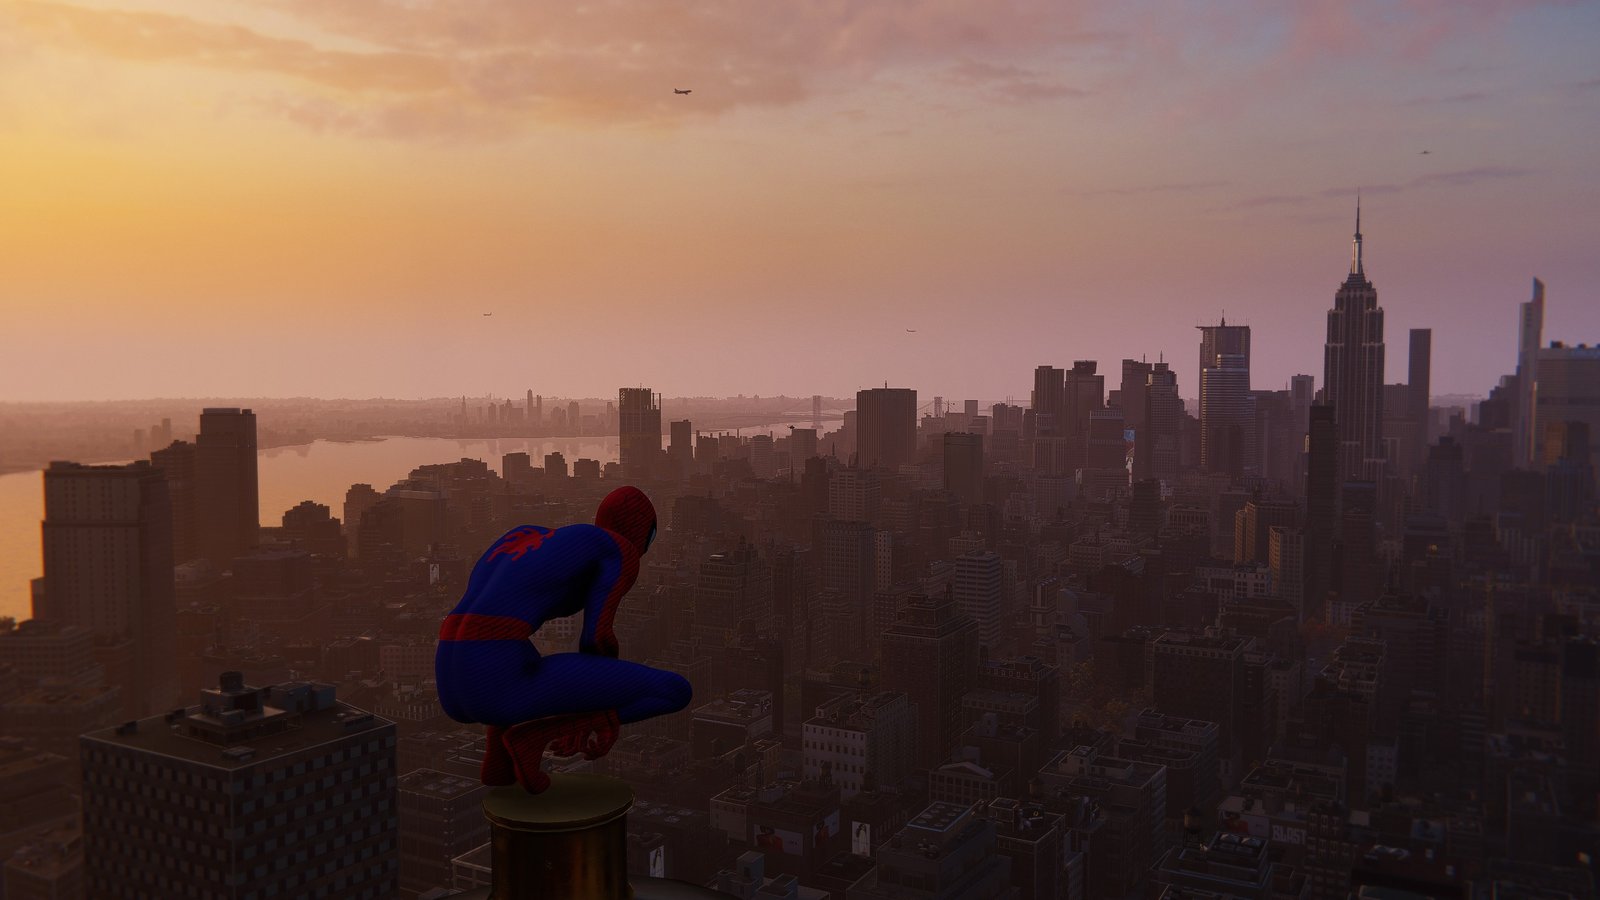 Spiderman sits at the very top of a skyscraper, overlooking New York City as the sun sets.